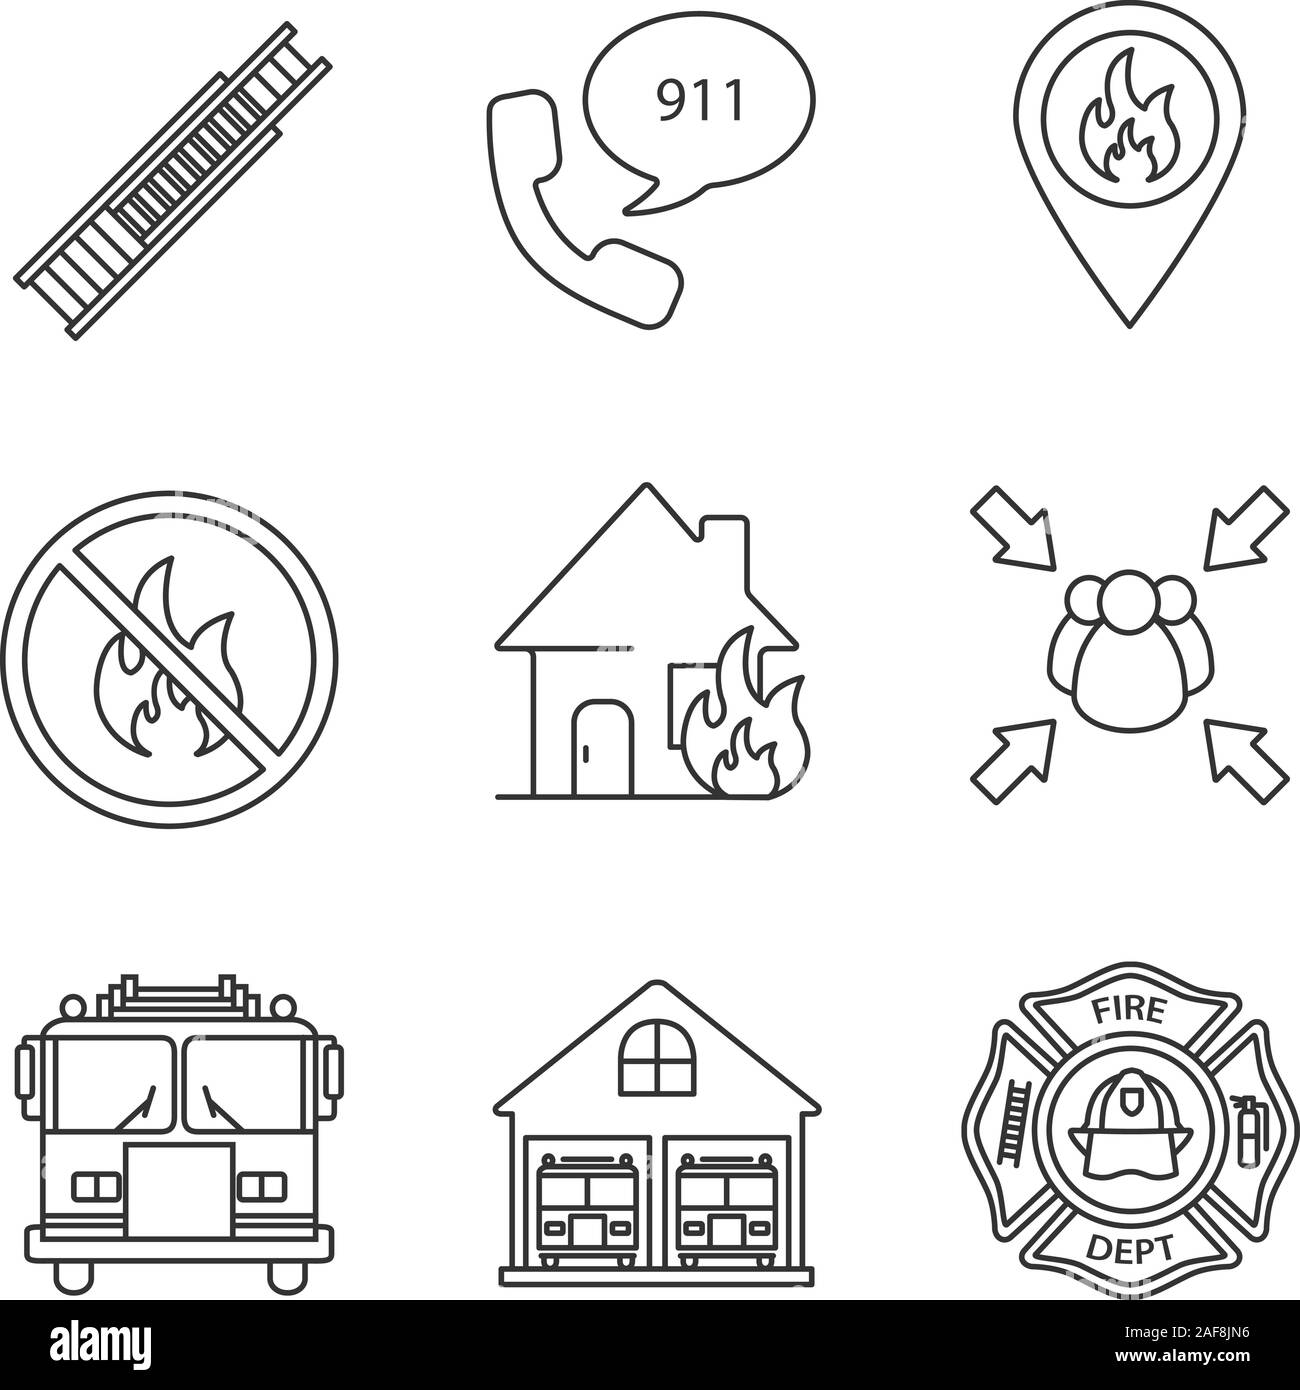 Firefighting linear icons set. Double extension ladder, emergency call, burning house, assembly point, firefighter badge, fire location. Thin line con Stock Vector